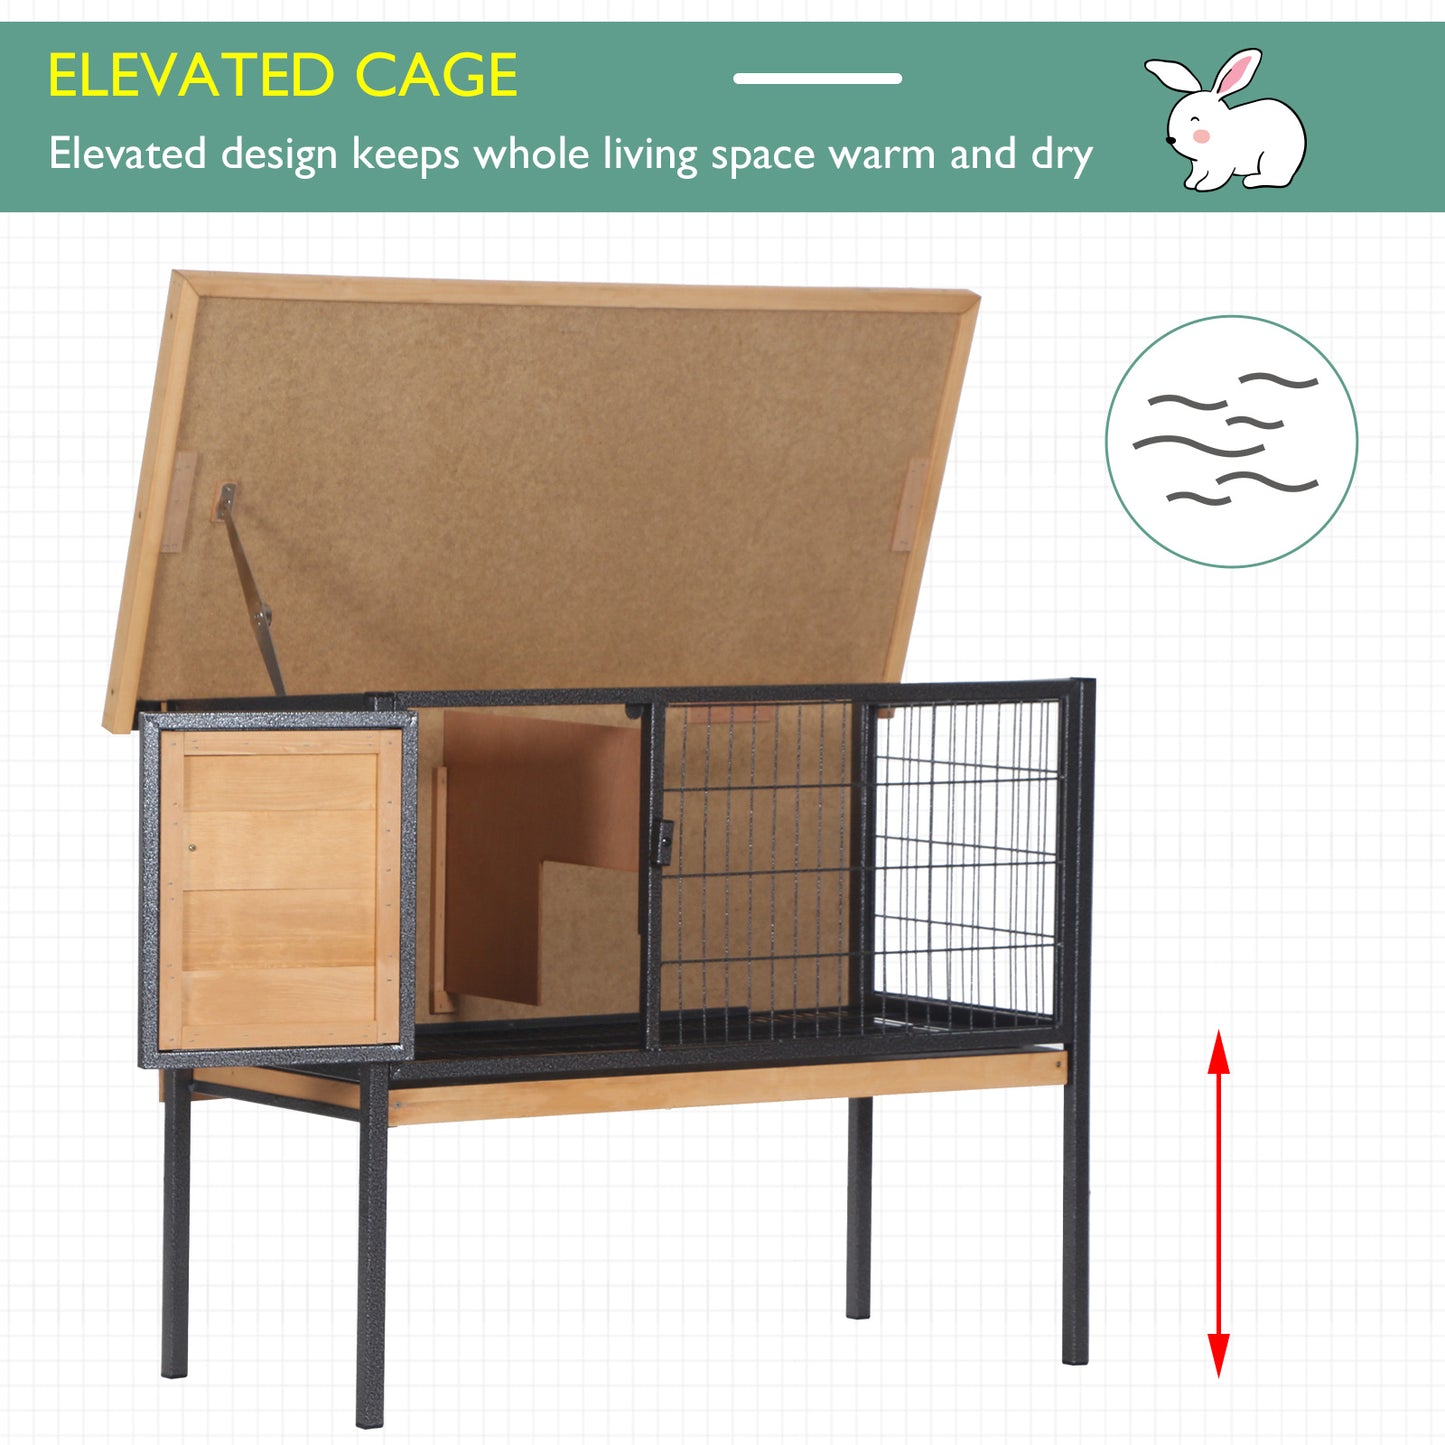 PawHut Wooden Rabbit Hutch Elevated Pet Cage with Slide-Out Tray Outdoor Natural